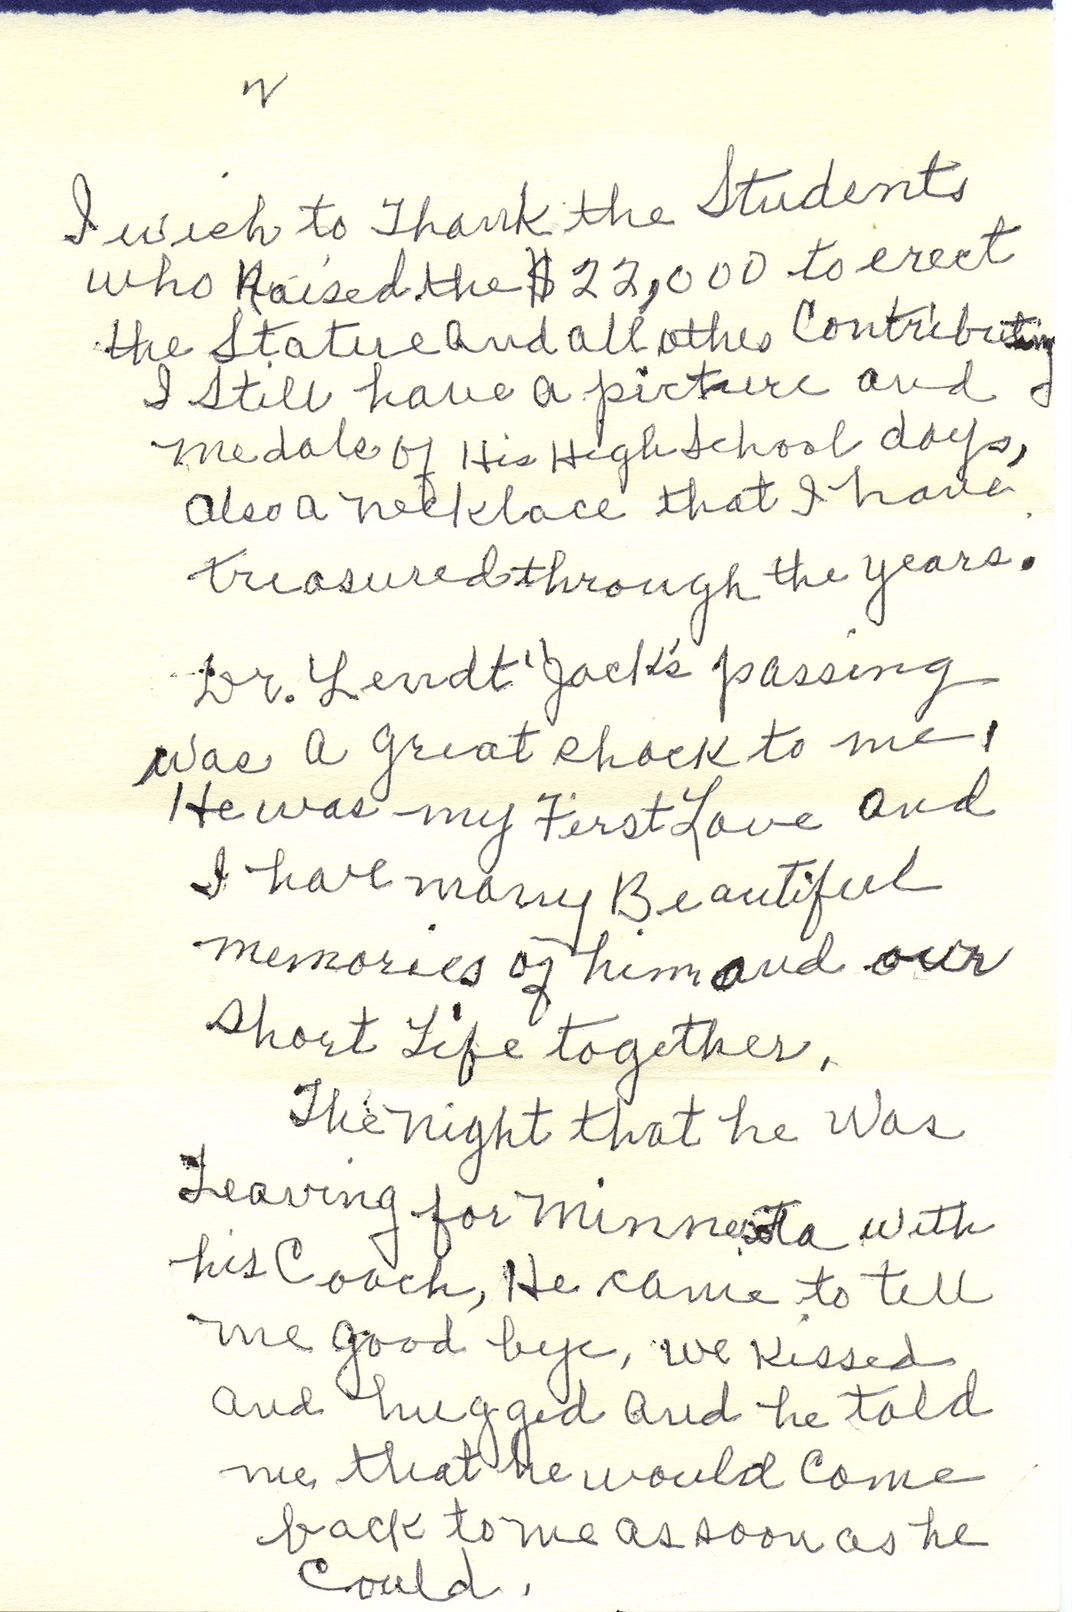 A page from a letter by Cora Mae Trice